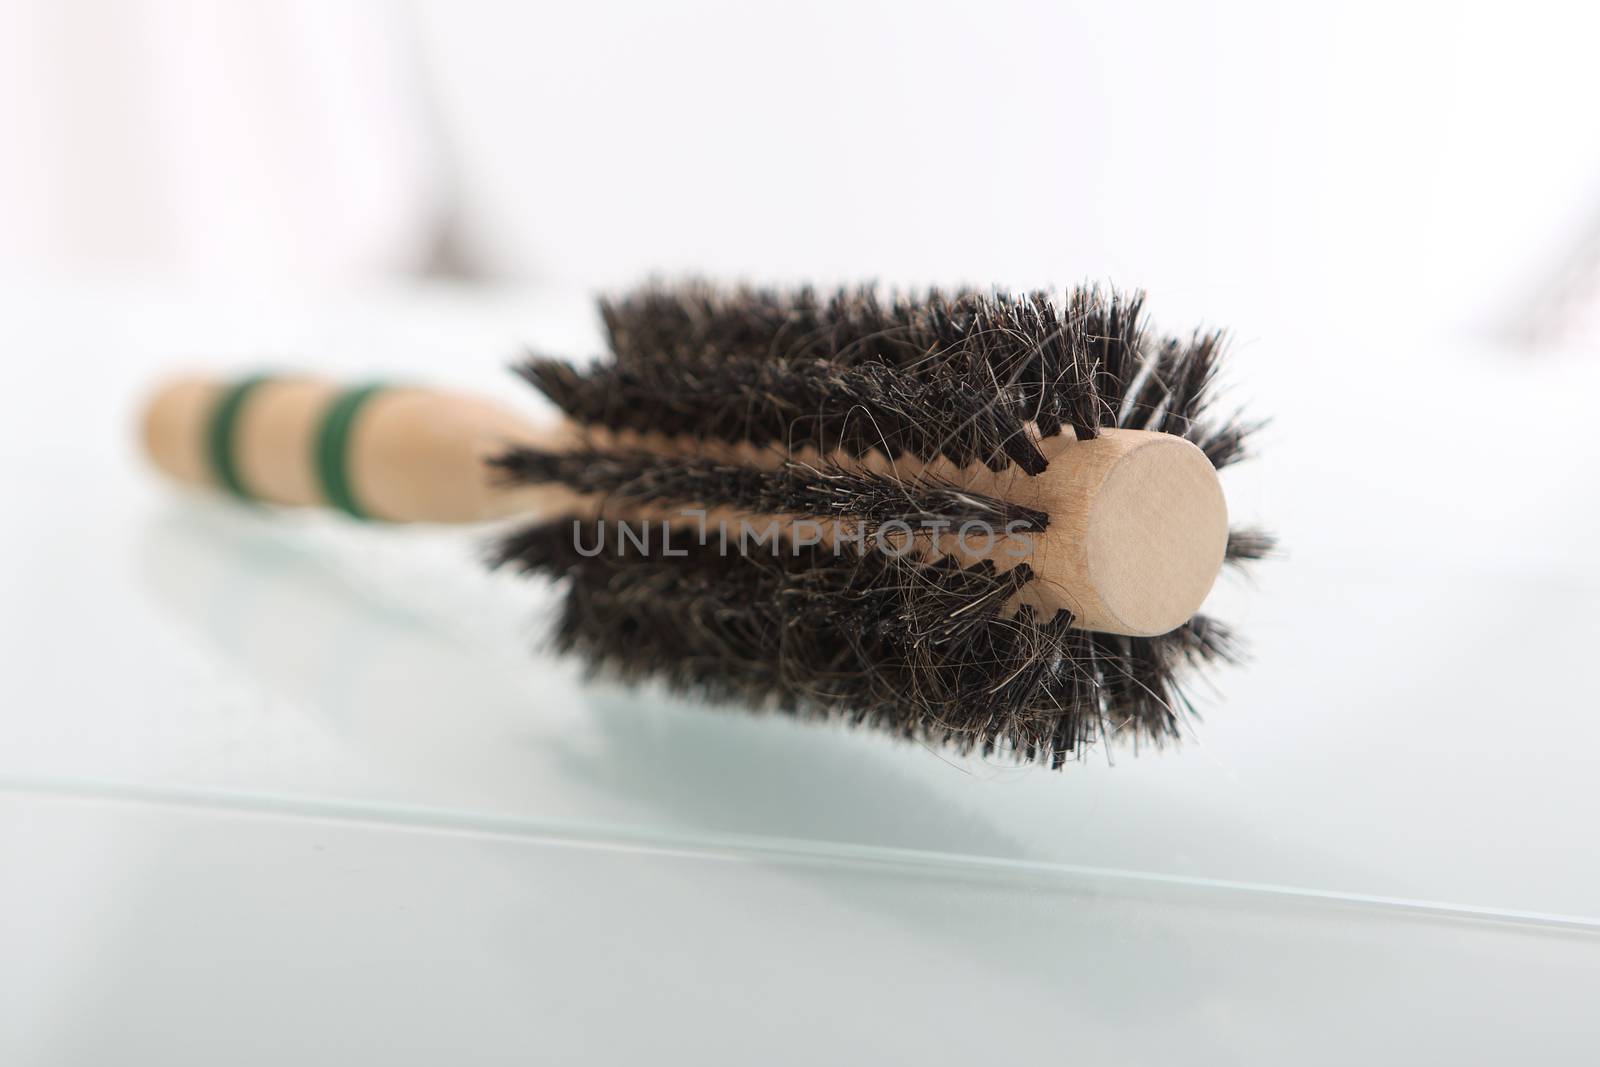 Round brush for styling hair. by robert_przybysz